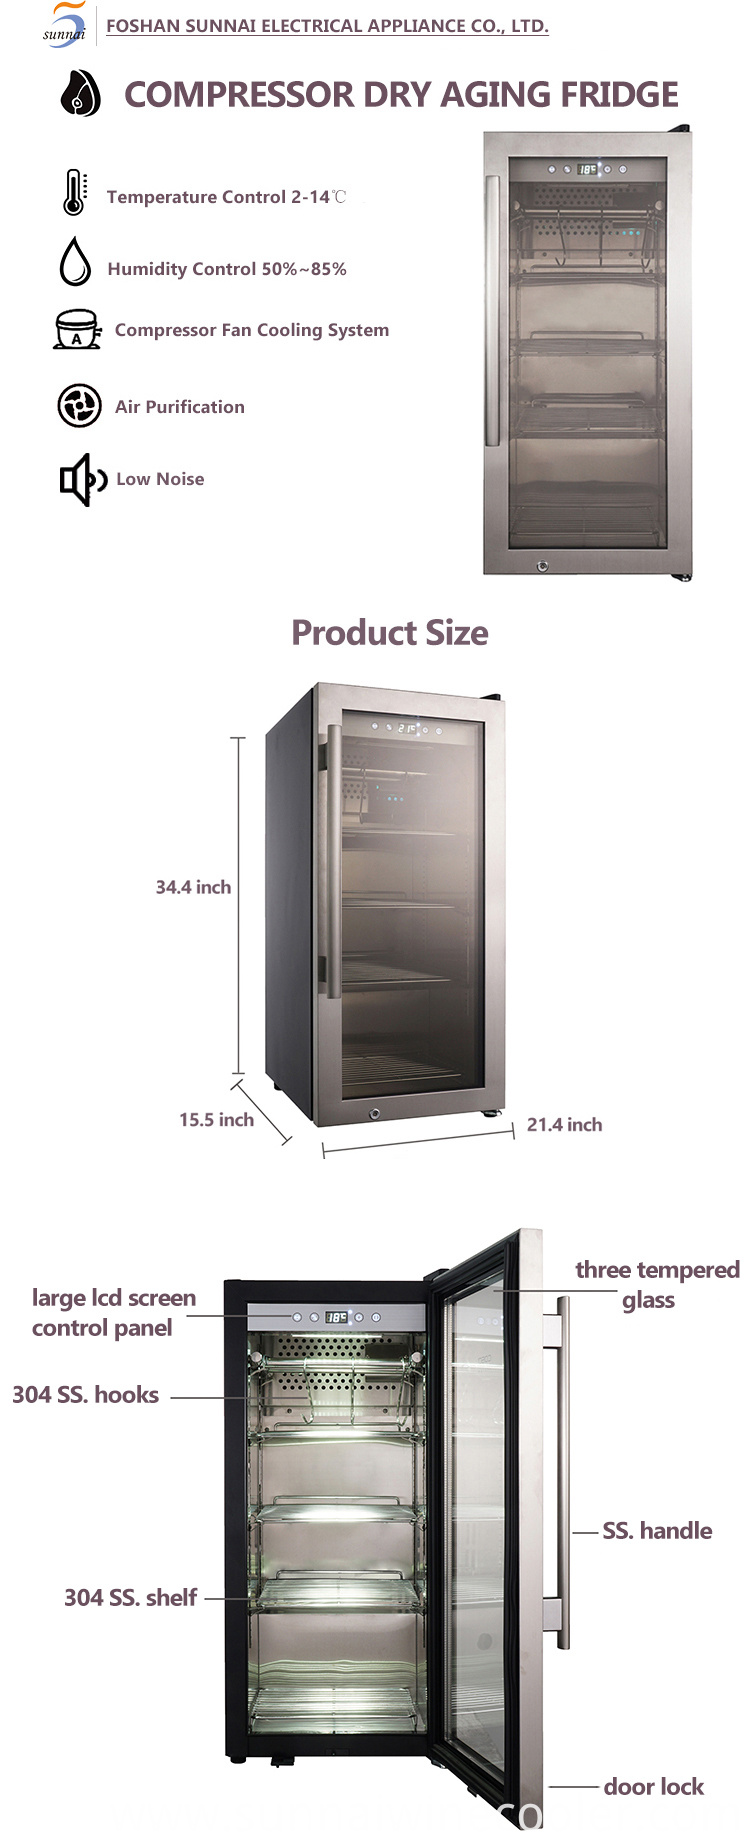 Dry Ager Meat-Maturing Fridge For Home and Commercial Use – Jackscool